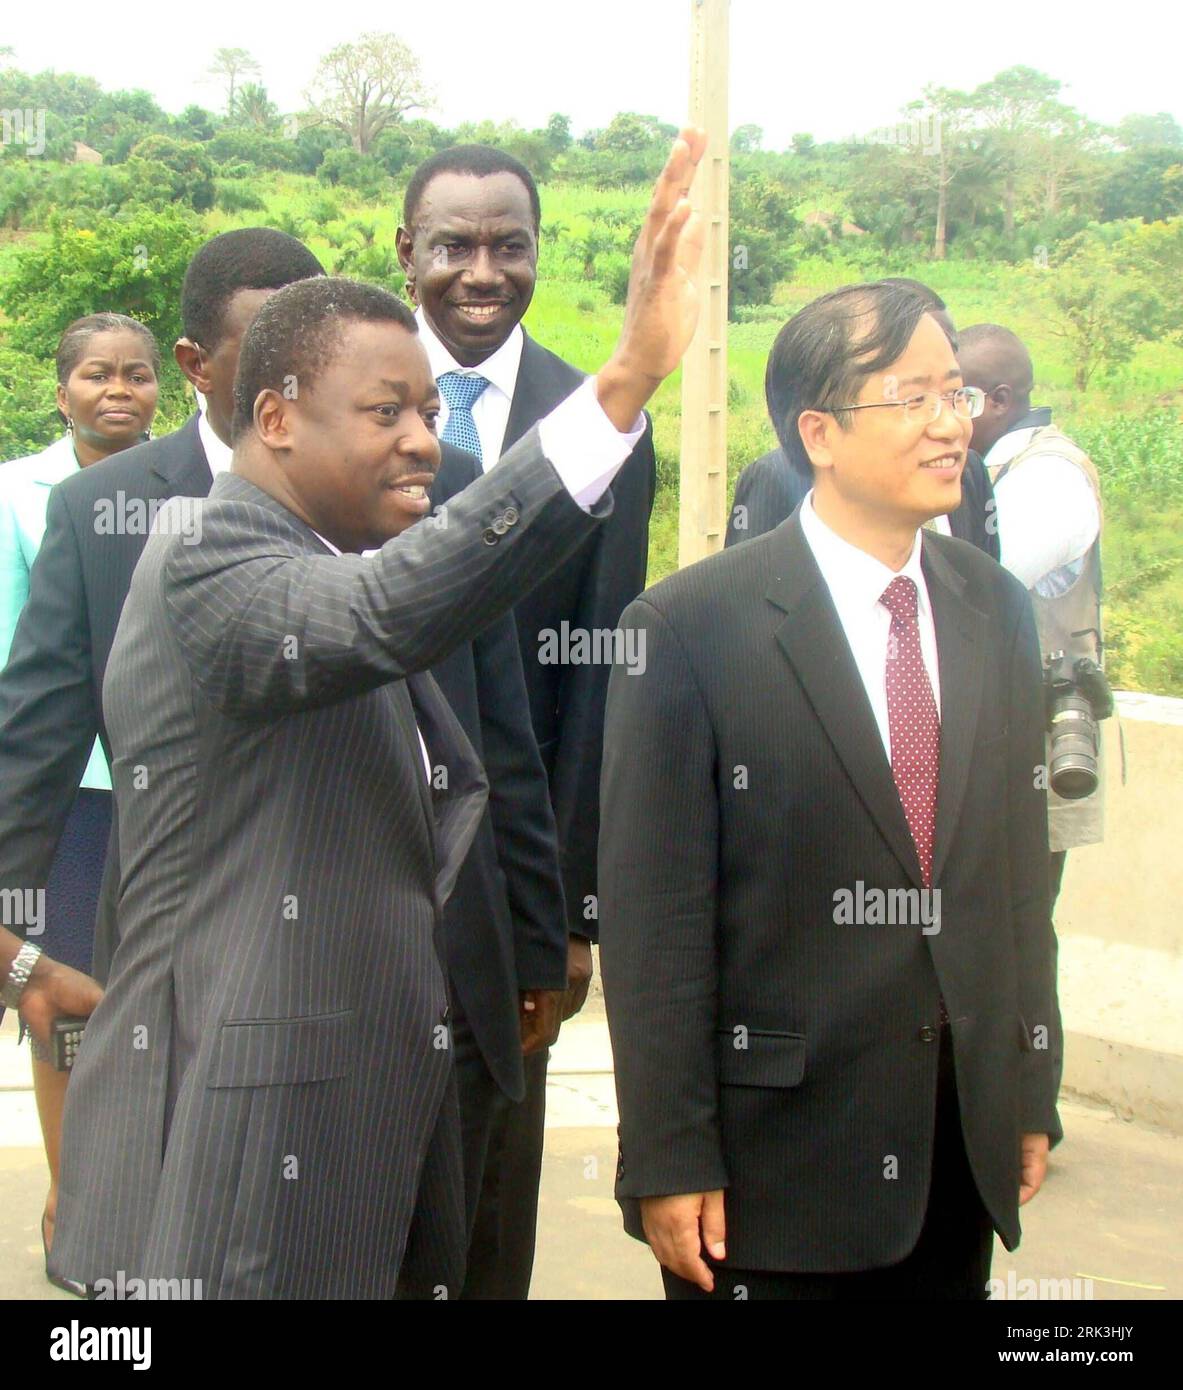 Bildnummer: 53518730  Datum: 07.10.2009  Copyright: imago/Xinhua (091007) -- LOME, Oct. 7, 2009 (Xinhua) -- Togolese President Faure Gnassingbe (front, L) and Chinese Ambassador to Togo Yang Min (front, R) arrive to cut the ribbon during the inauguration ceremony for three bridges reconstructed by China at Amakpape, Togo, Oct. 7, 2009. Faure Gnassingbe on Wednesday presided over the ceremony to open three major bridges reconstructed by China at a cost of 2.7 billion FCFA (5.8 million U. S. dollars). (Xinhua) (gj) (4)TOGO-LOME-BRIDGES-CHINA-INAUGURATION CEREMONY PUBLICATIONxNOTxINxCHN People Po Stock Photo